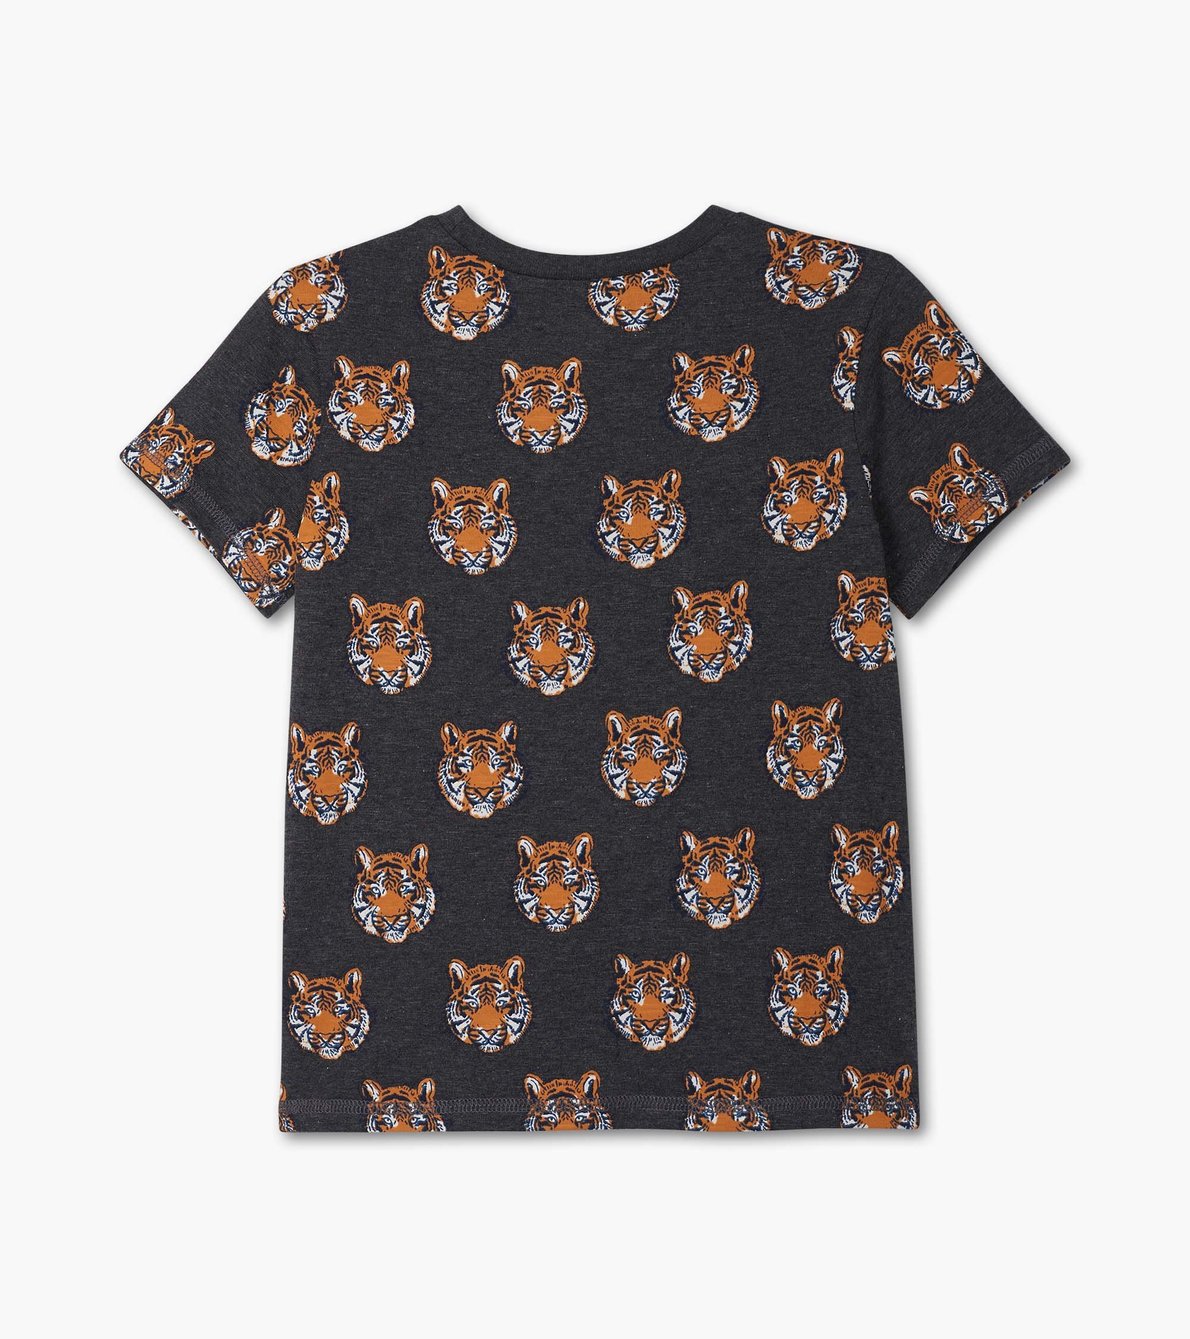 View larger image of Fierce Tigers Graphic Tee